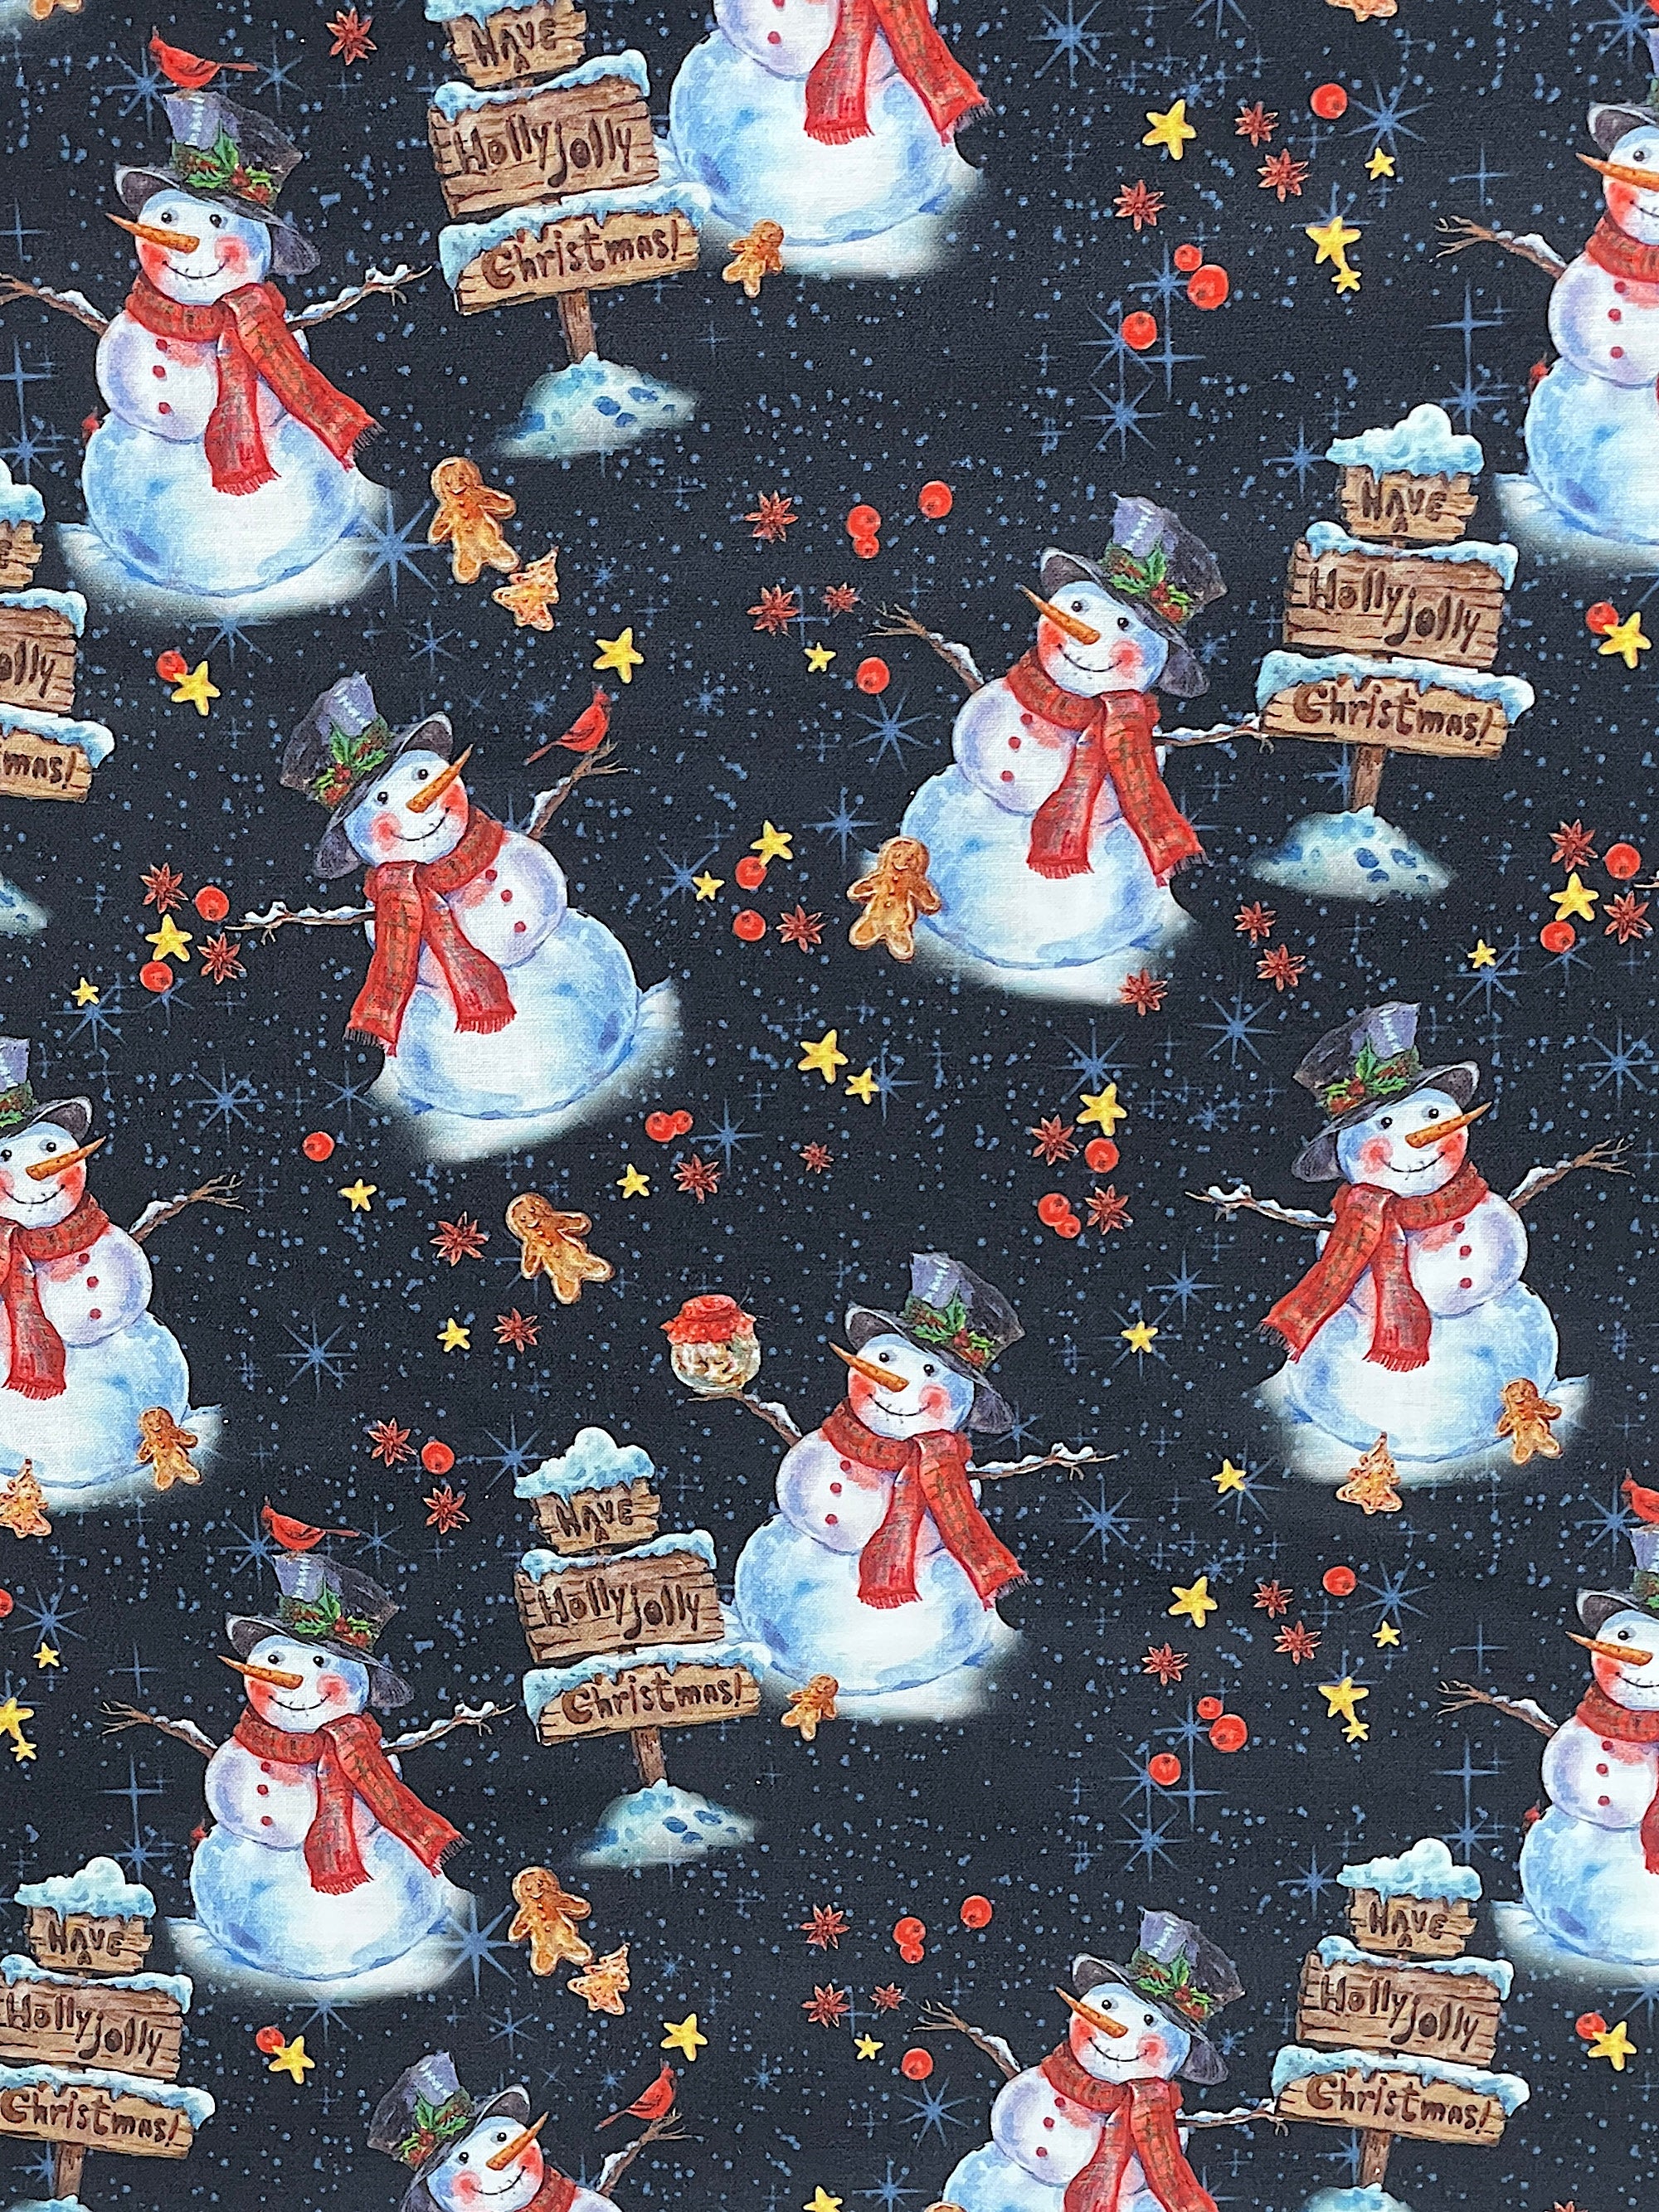 This fabric is part of the Frosty Delights collection by Paintbrush Studio.&nbsp; this dark navy fabric is covered with snowmen, gingerbread men a a sign that says Have a Holly Jolly Christmas.